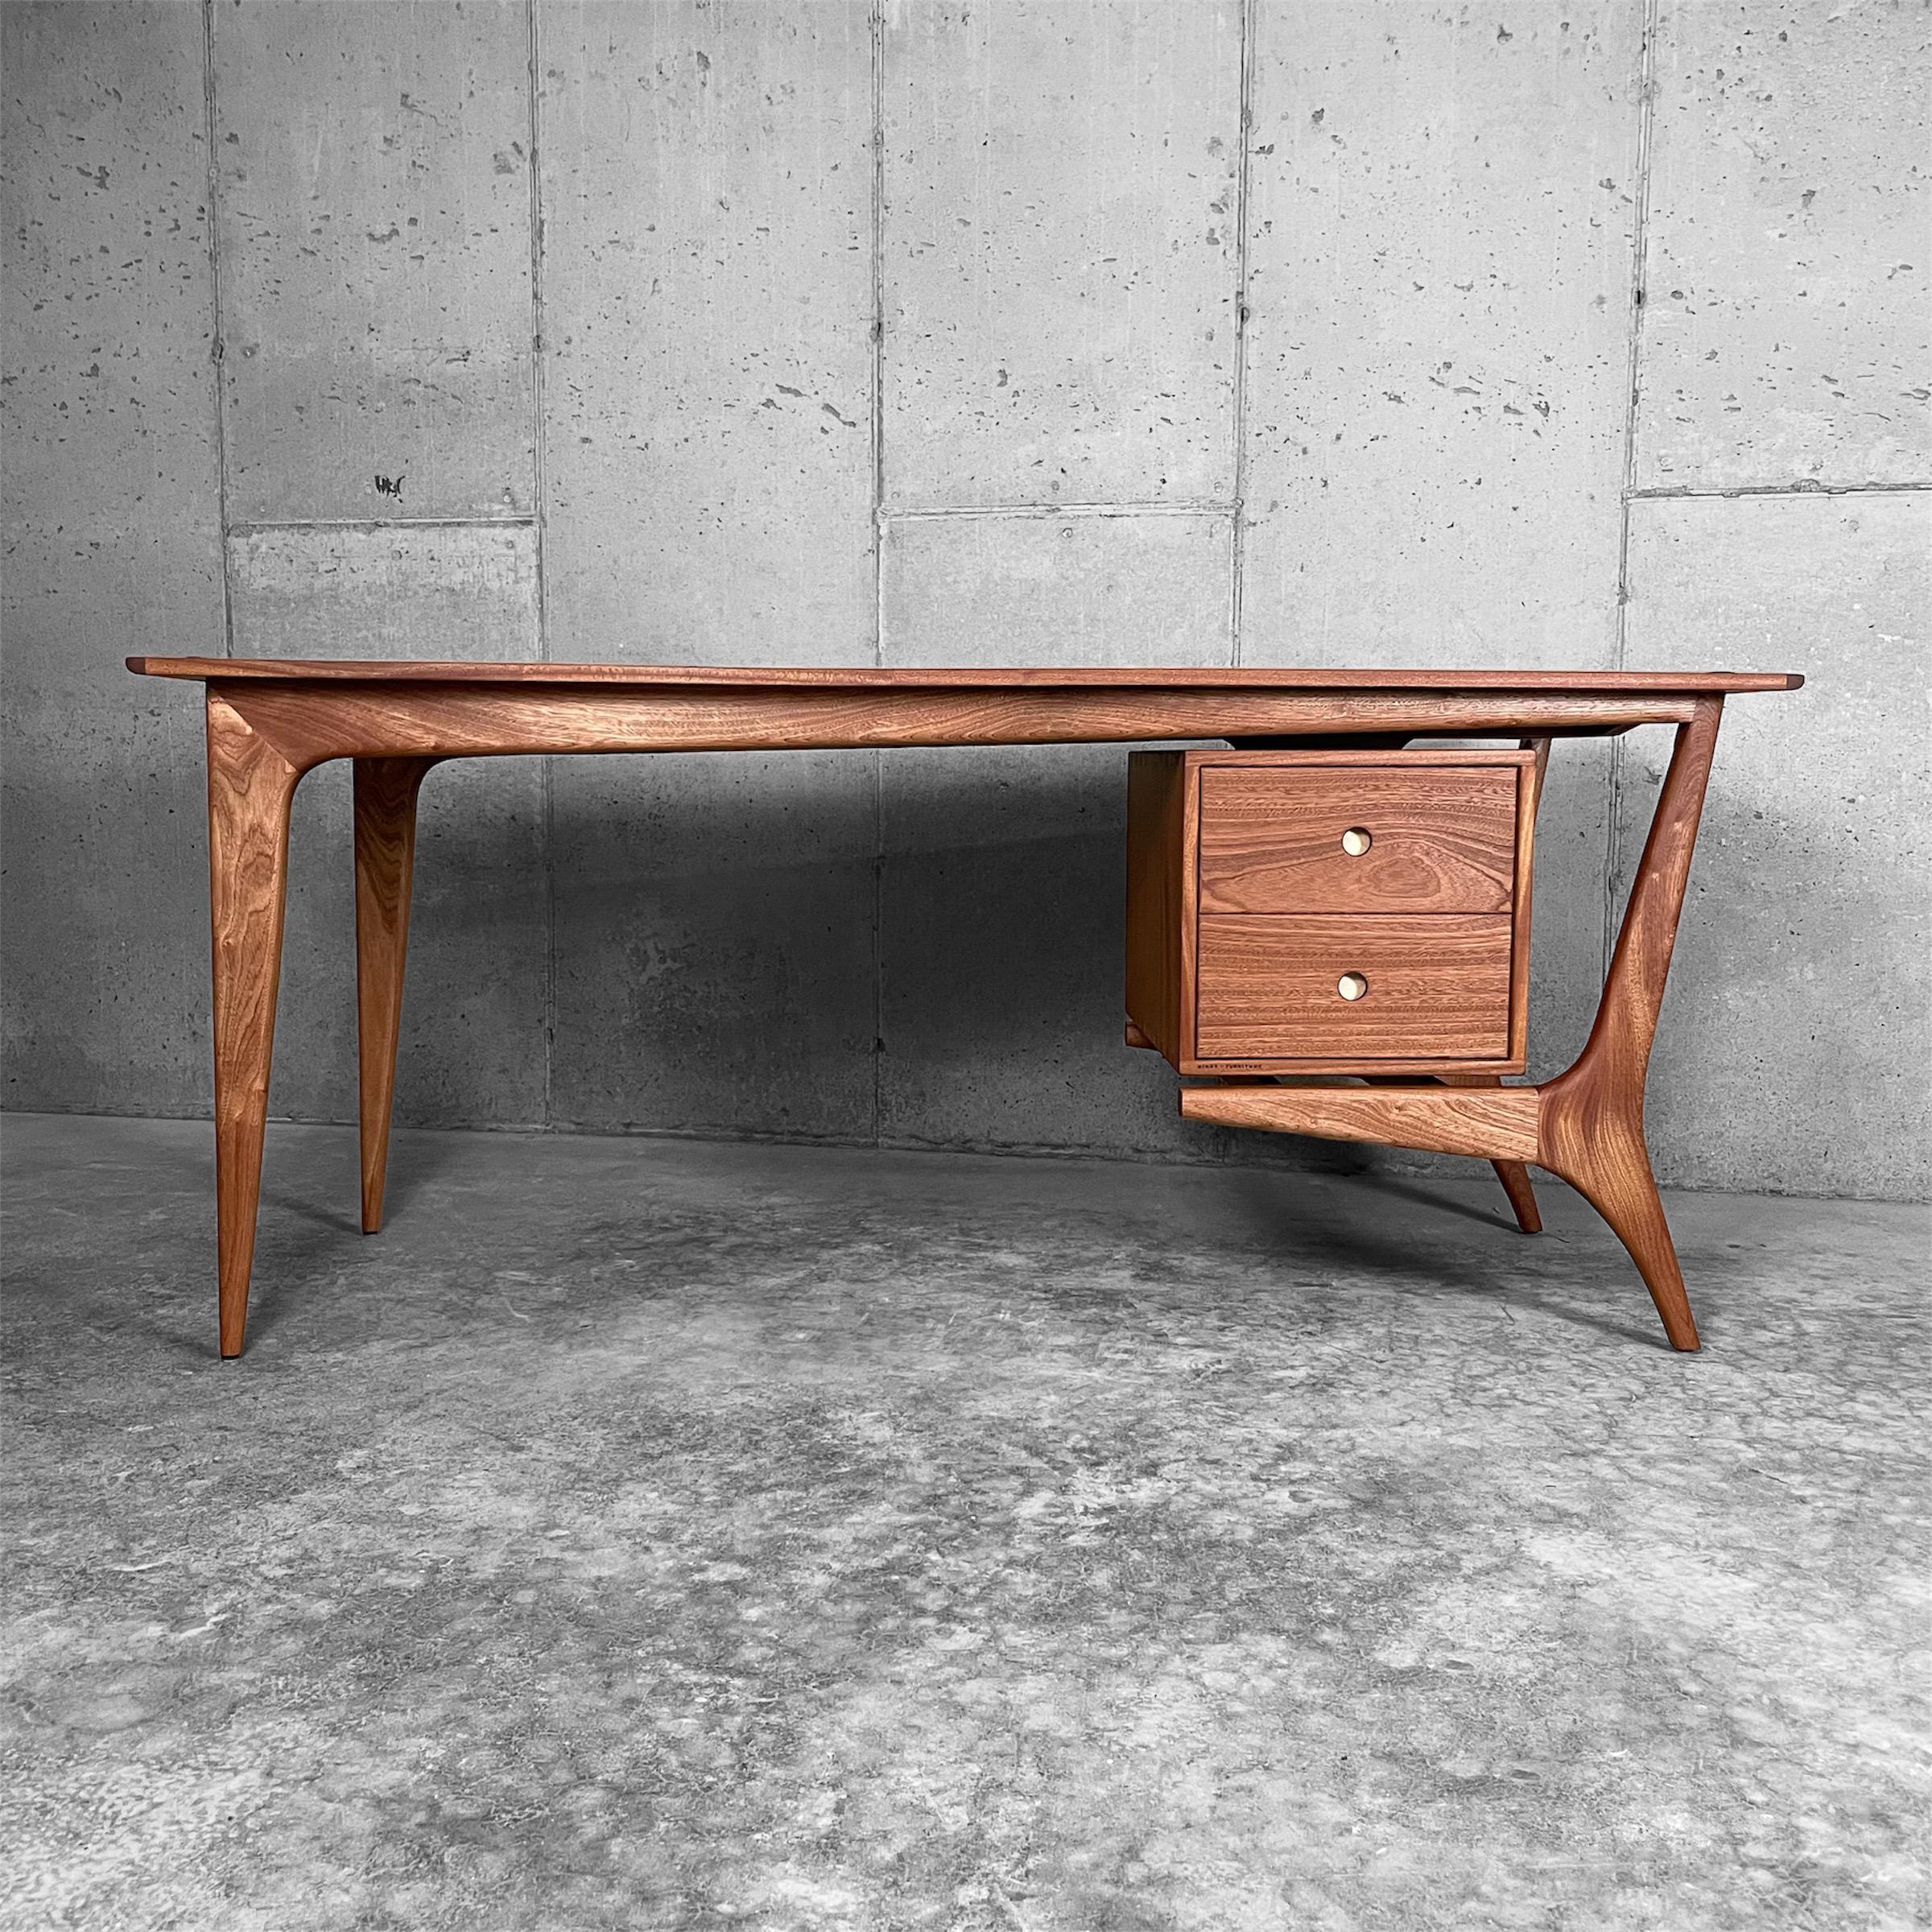 Desk No.1 is a highly detailed and functional writing desk featuring traditional joinery that has been lost in today’s fast built, throw away furniture. Although there have been multiple made, no two are the same and are unique in their own way.